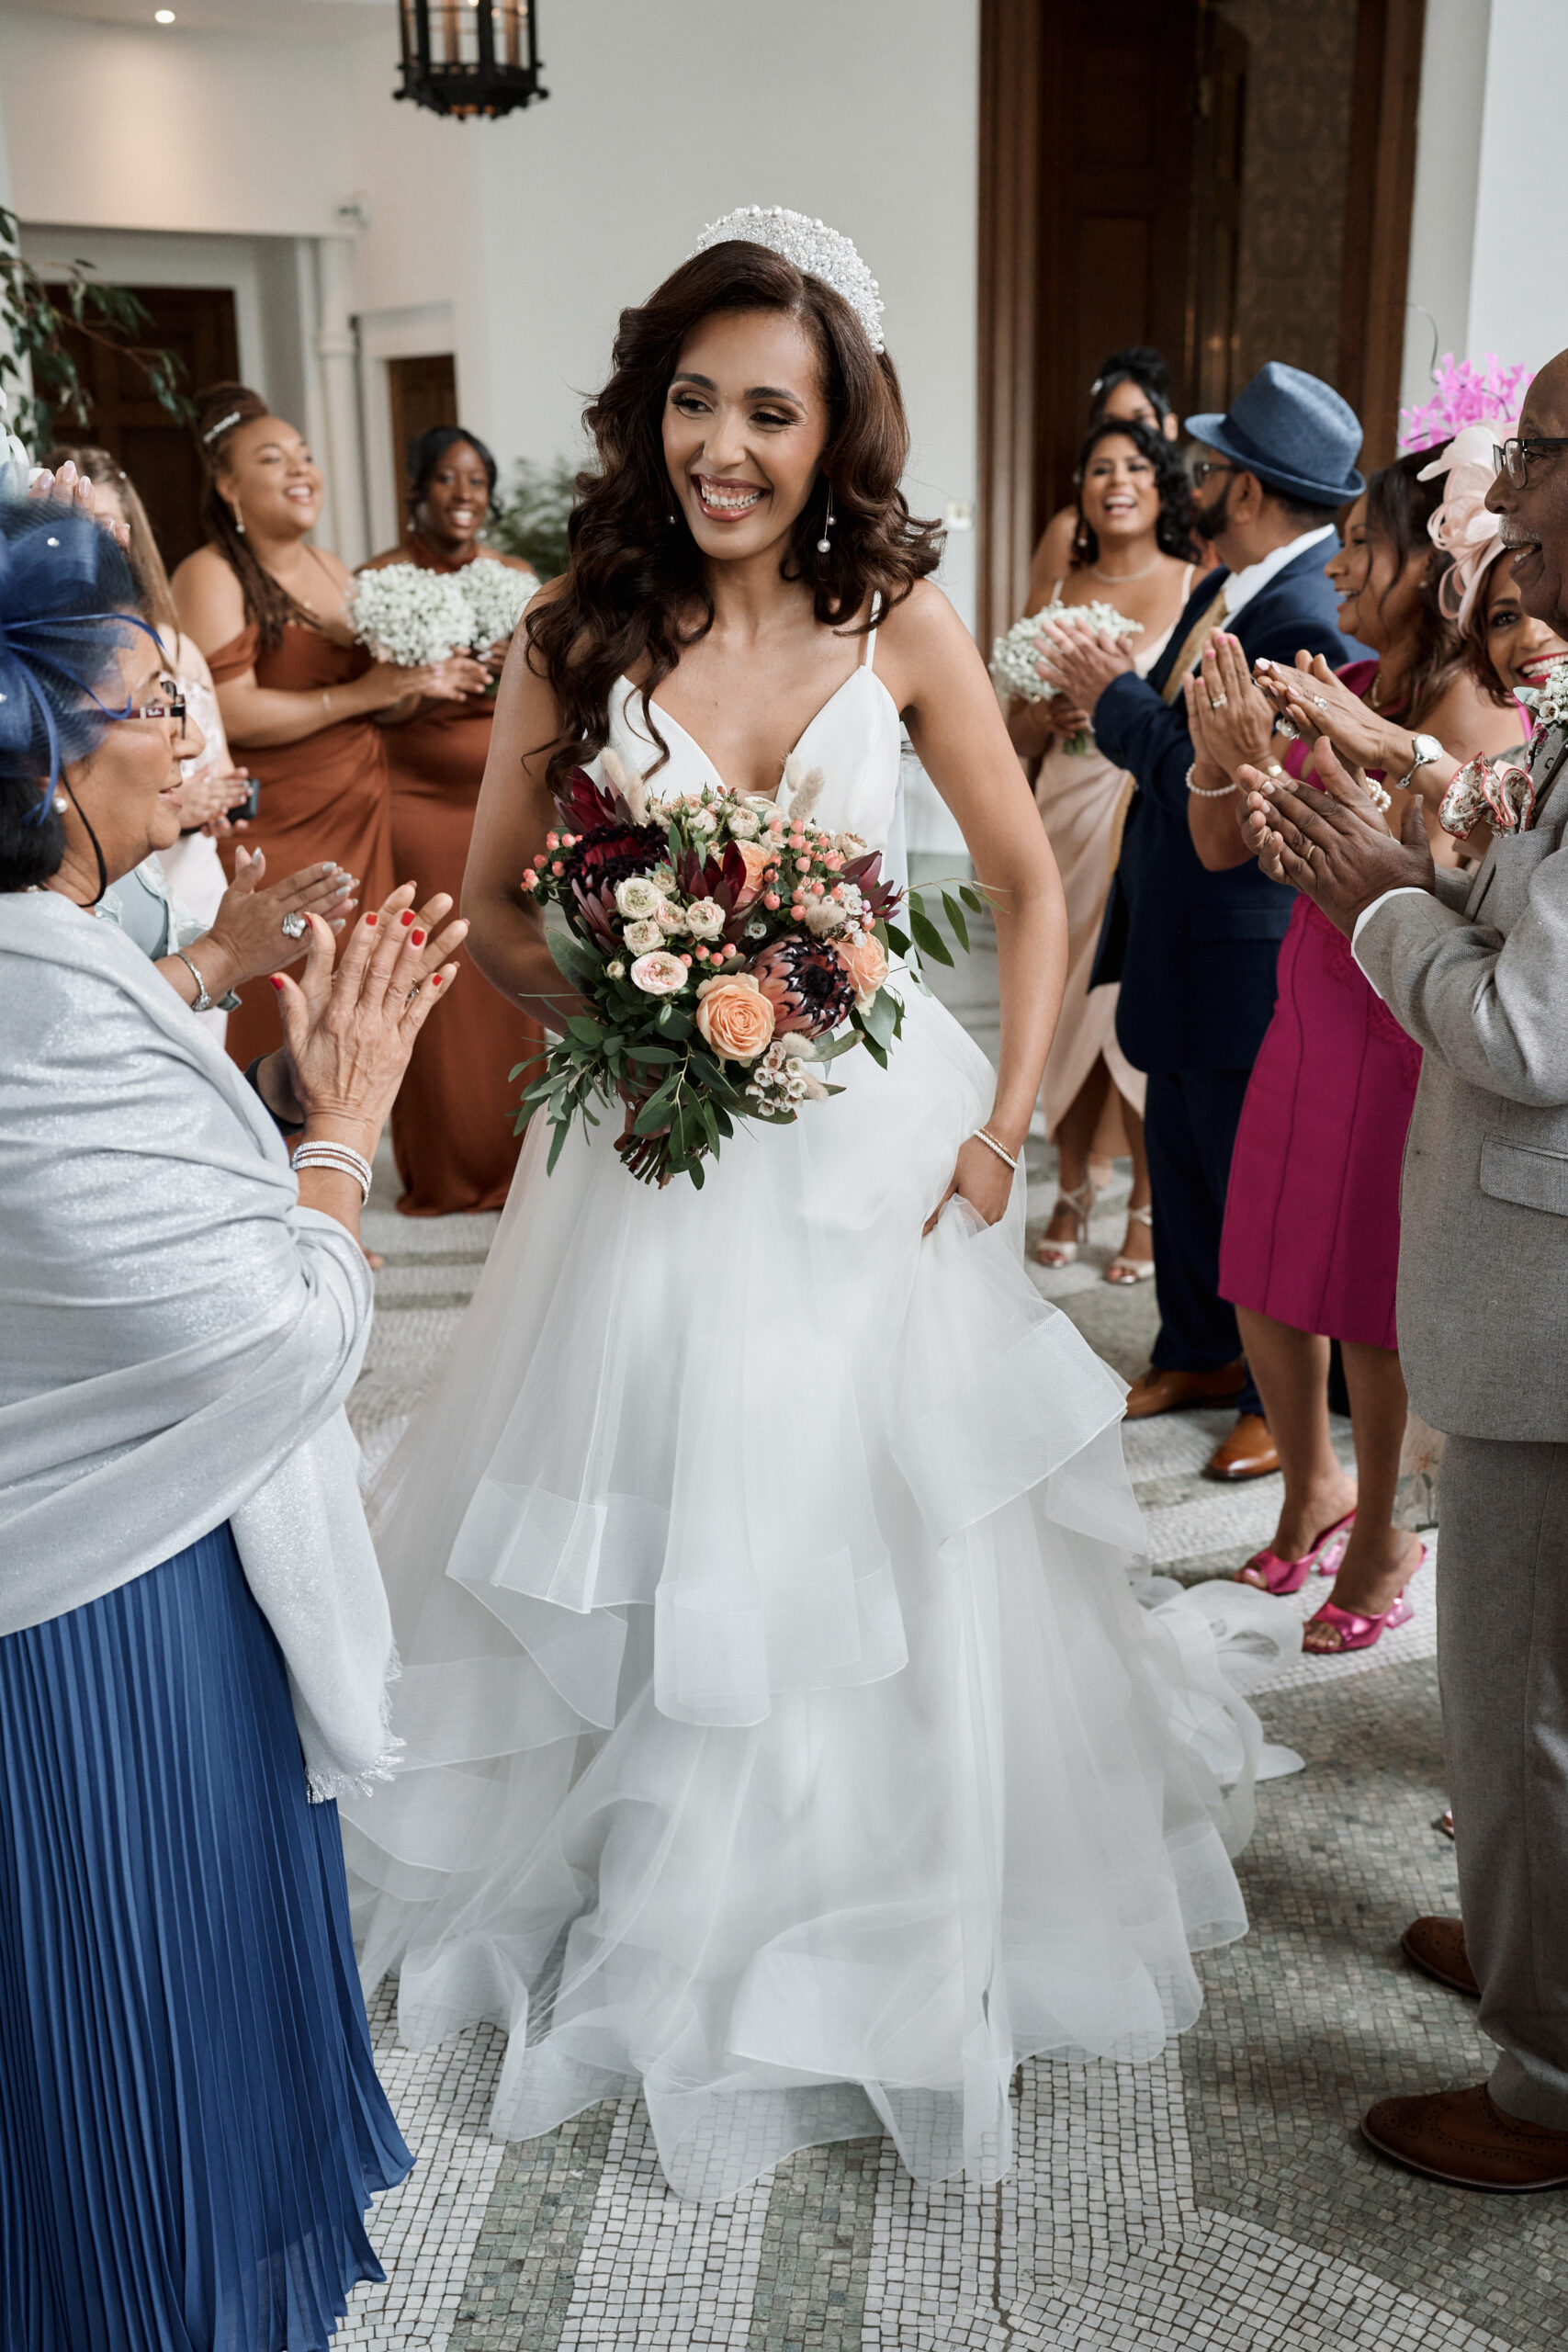 A Bride in a white outfit carrying a bunch of flowers.